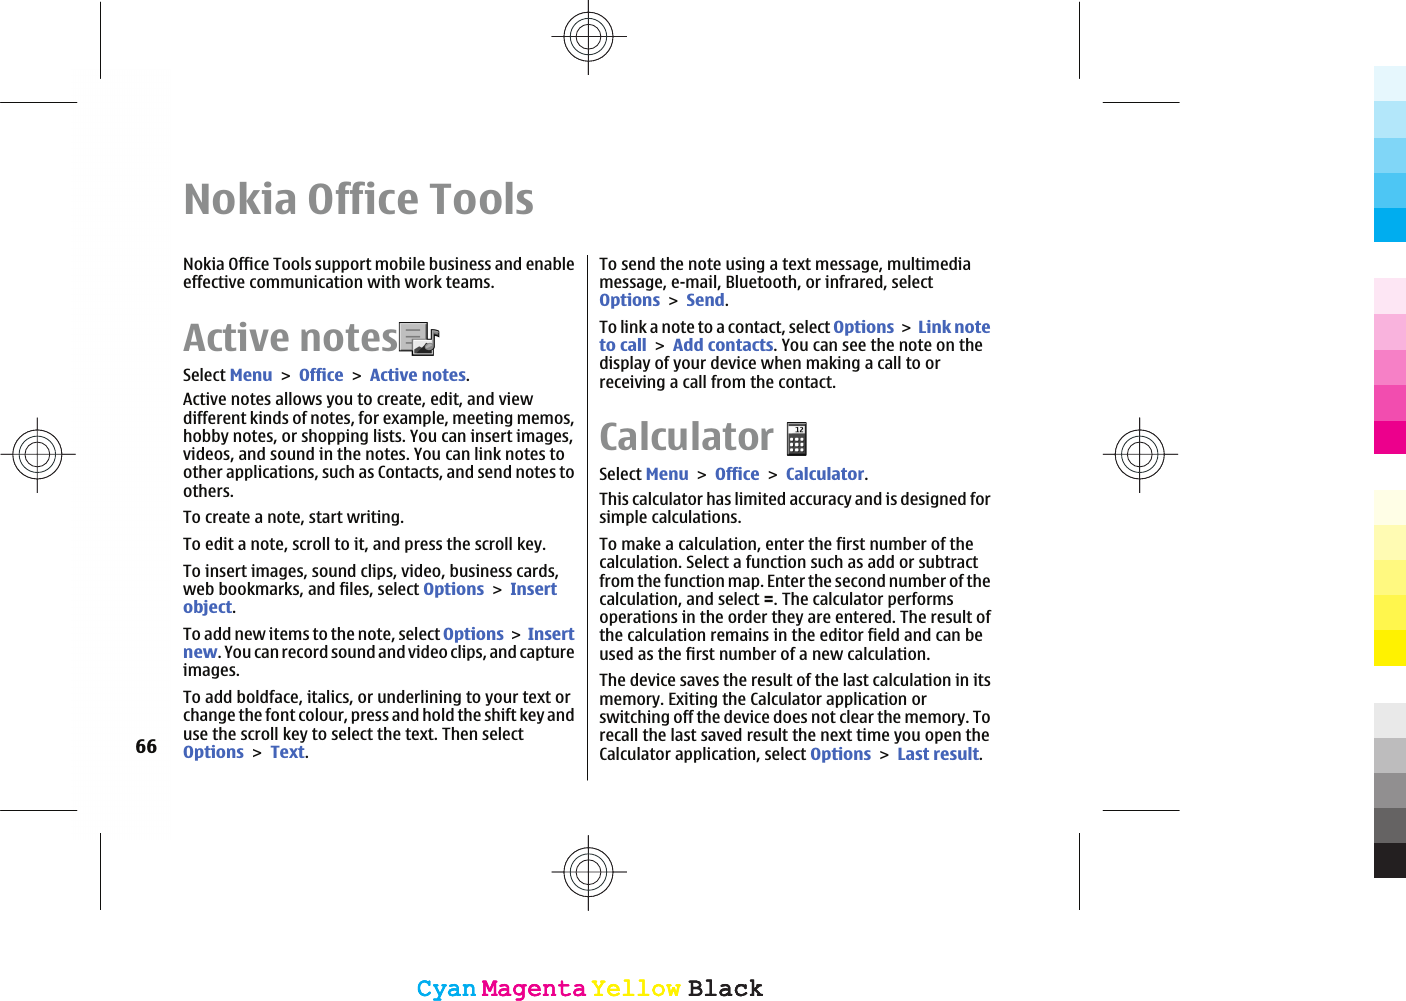 Nokia Office ToolsNokia Office Tools support mobile business and enableeffective communication with work teams.Active notesSelect MenuOfficeActive notes.Active notes allows you to create, edit, and viewdifferent kinds of notes, for example, meeting memos,hobby notes, or shopping lists. You can insert images,videos, and sound in the notes. You can link notes toother applications, such as Contacts, and send notes toothers.To create a note, start writing.To edit a note, scroll to it, and press the scroll key.To insert images, sound clips, video, business cards,web bookmarks, and files, select OptionsInsertobject.To add new items to the note, select OptionsInsertnew. You can record sound and video clips, and captureimages.To add boldface, italics, or underlining to your text orchange the font colour, press and hold the shift key anduse the scroll key to select the text. Then selectOptionsText.To send the note using a text message, multimediamessage, e-mail, Bluetooth, or infrared, selectOptionsSend.To link a note to a contact, select OptionsLink noteto callAdd contacts. You can see the note on thedisplay of your device when making a call to orreceiving a call from the contact.CalculatorSelect MenuOfficeCalculator.This calculator has limited accuracy and is designed forsimple calculations.To make a calculation, enter the first number of thecalculation. Select a function such as add or subtractfrom the function map. Enter the second number of thecalculation, and select =. The calculator performsoperations in the order they are entered. The result ofthe calculation remains in the editor field and can beused as the first number of a new calculation.The device saves the result of the last calculation in itsmemory. Exiting the Calculator application orswitching off the device does not clear the memory. Torecall the last saved result the next time you open theCalculator application, select OptionsLast result.66CyanCyanMagentaMagentaYellowYellowBlackBlackCyanCyanMagentaMagentaYellowYellowBlackBlack